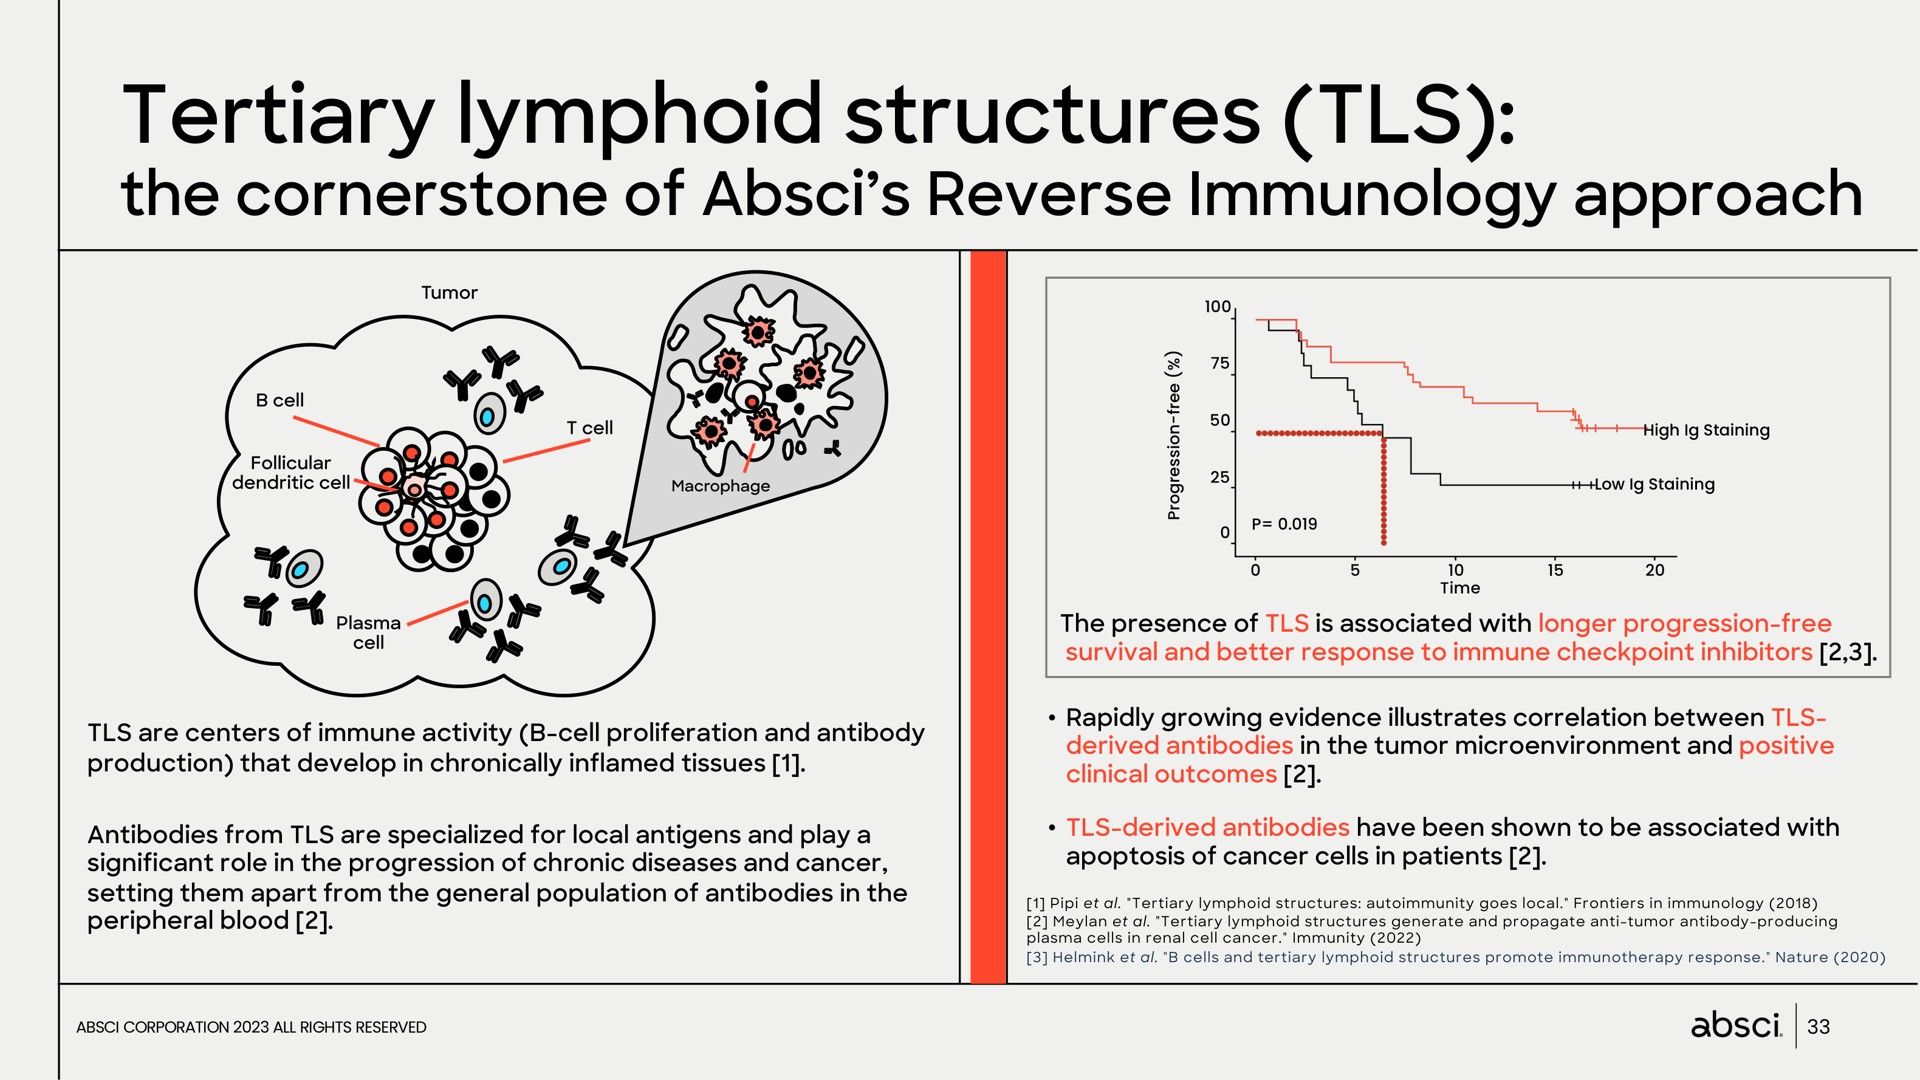 tertiary lymphoid structures the cornerstone of reverse immunology approach | Absci